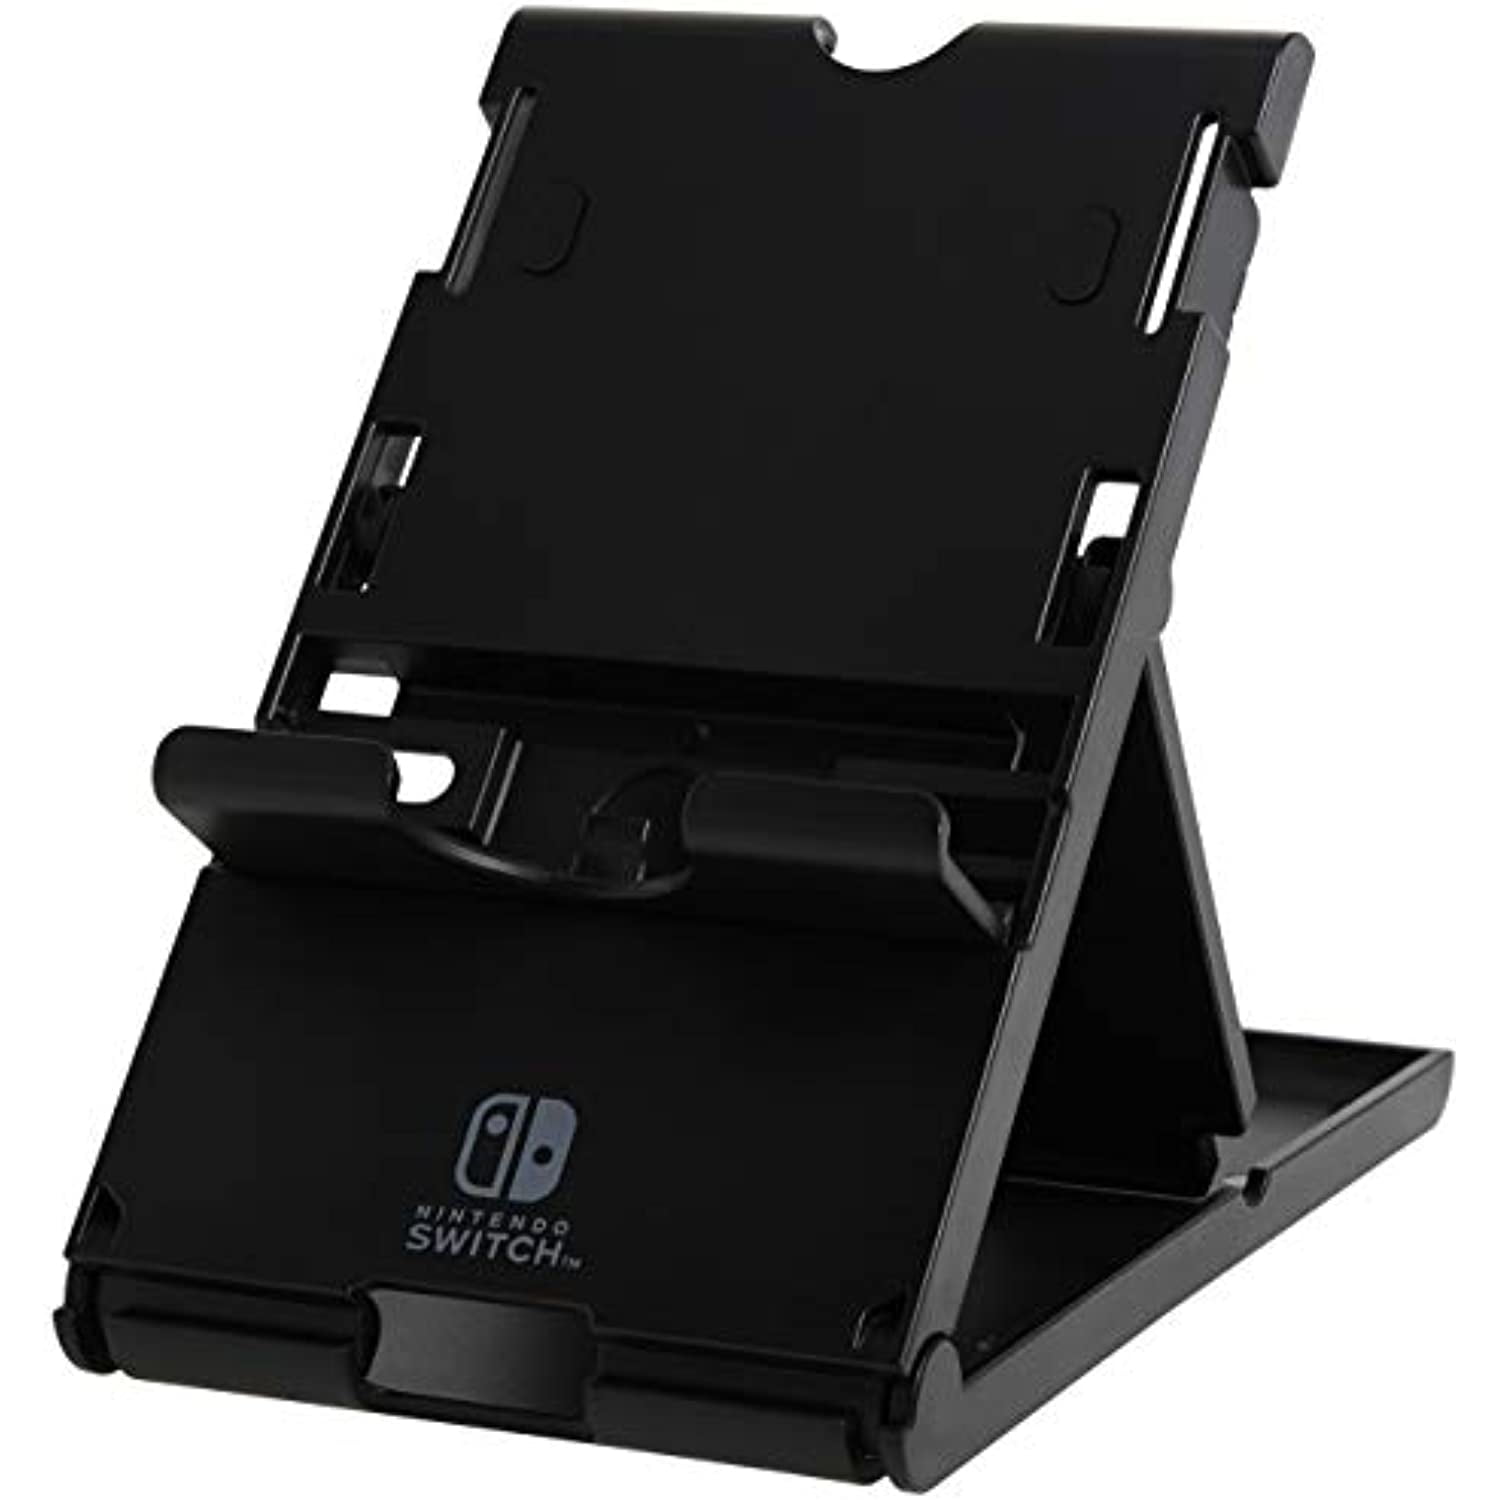 HORI Compact Playstand for Nintendo Switch Officially Licensed by Nintendo - image 1 of 8